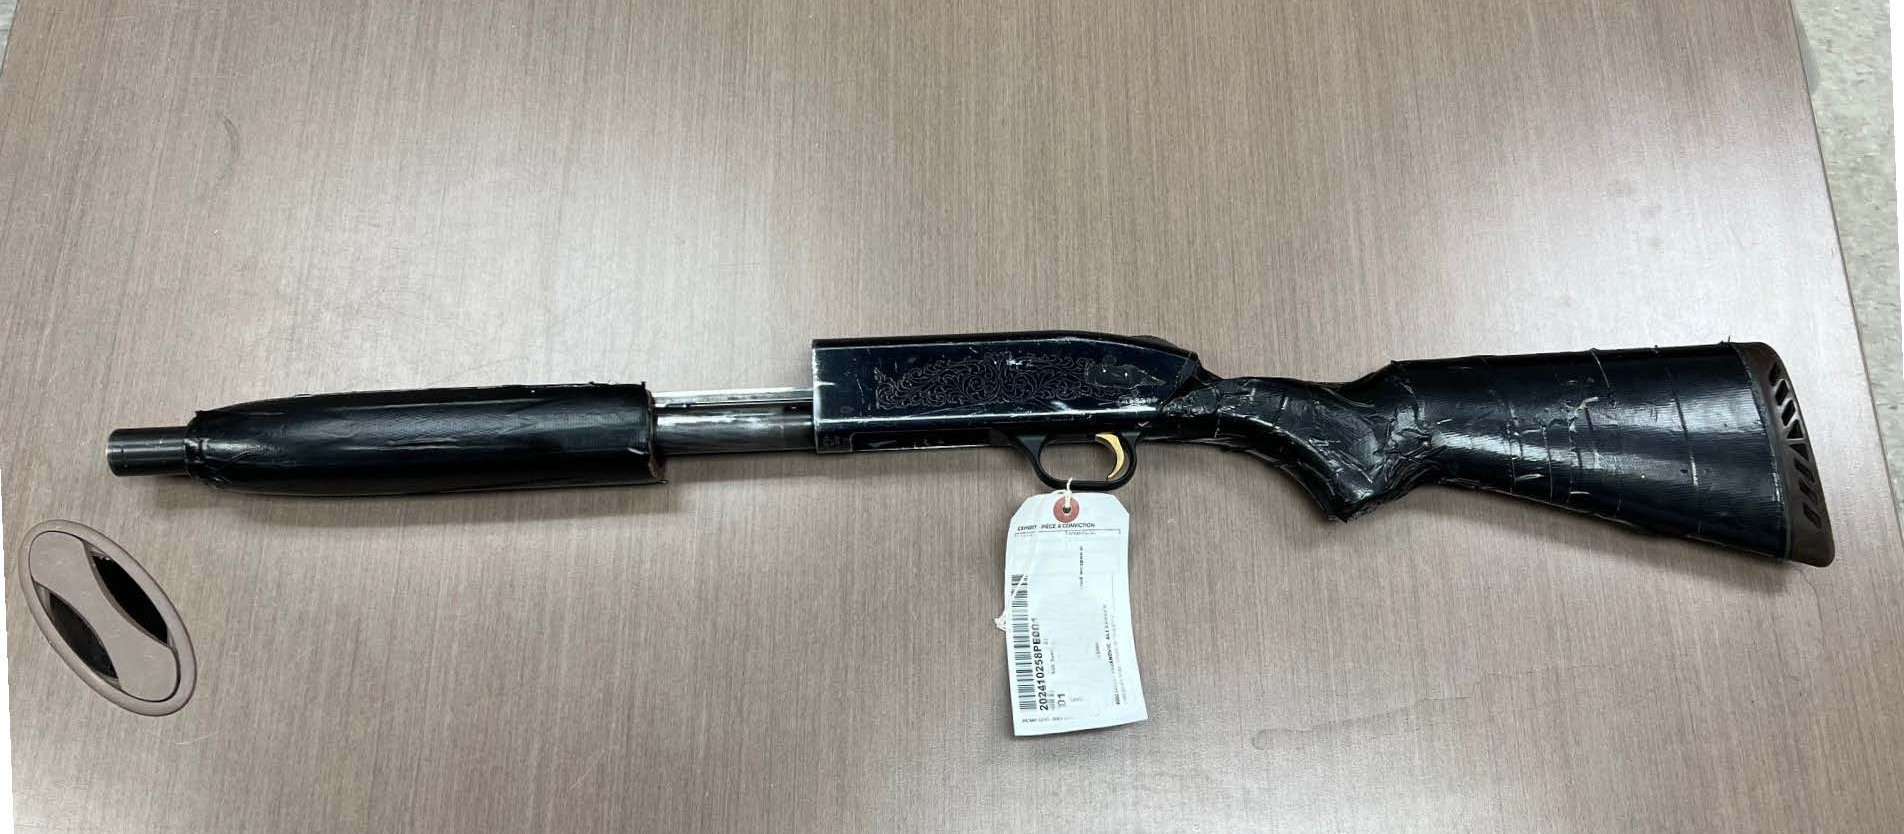 15-year-old facing weapons charges after RCMP respond to possible home invasion and seize gun